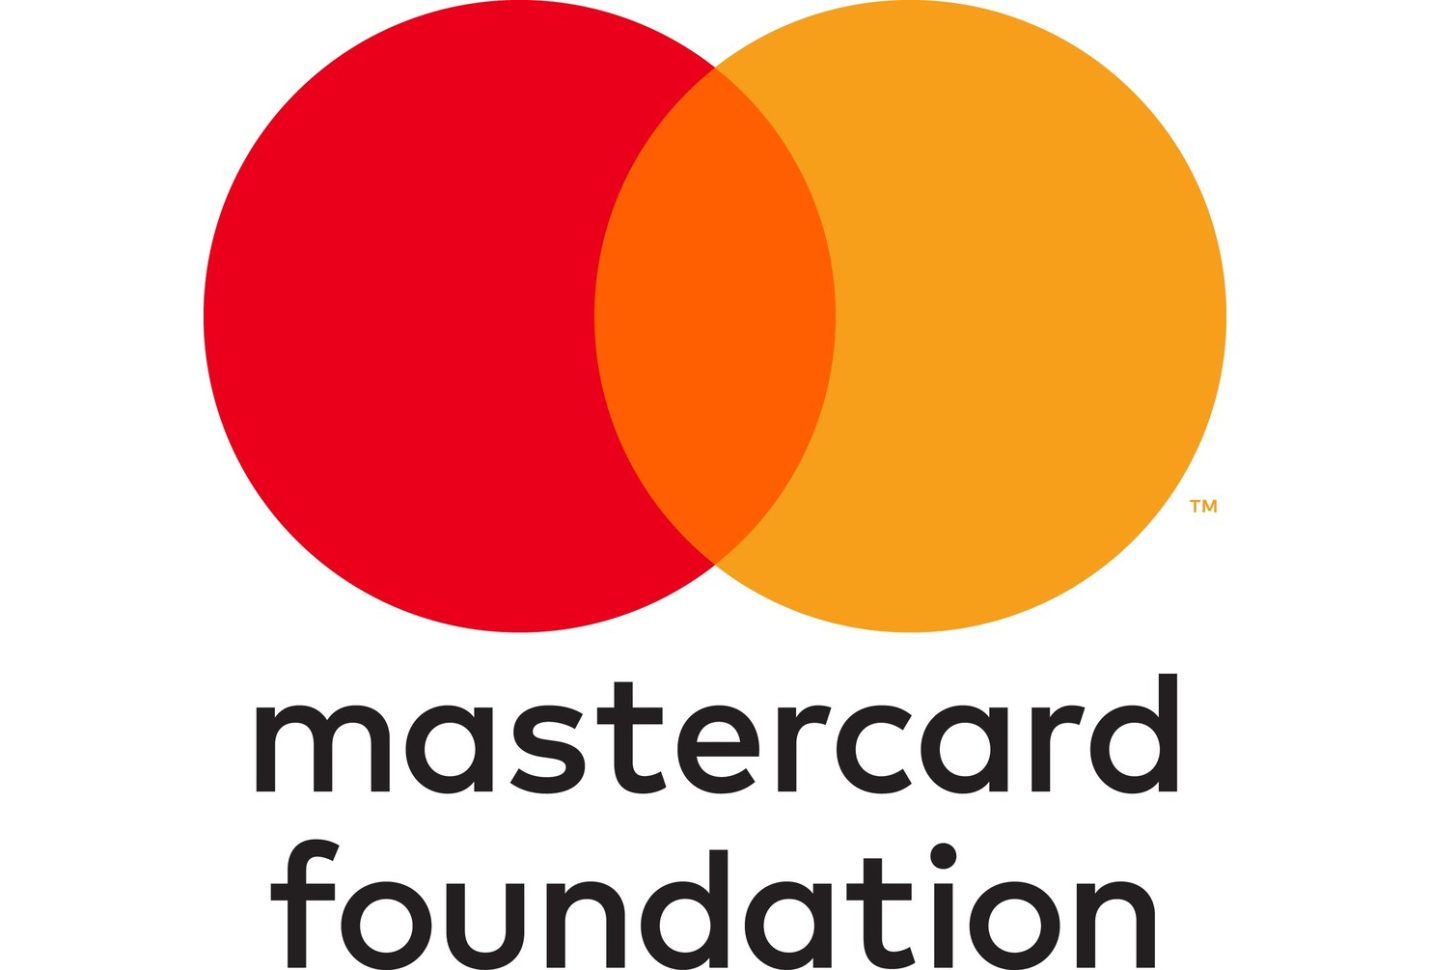 Mastercard Foundation became one of largest charitable foundations globally with assets of $37 bn